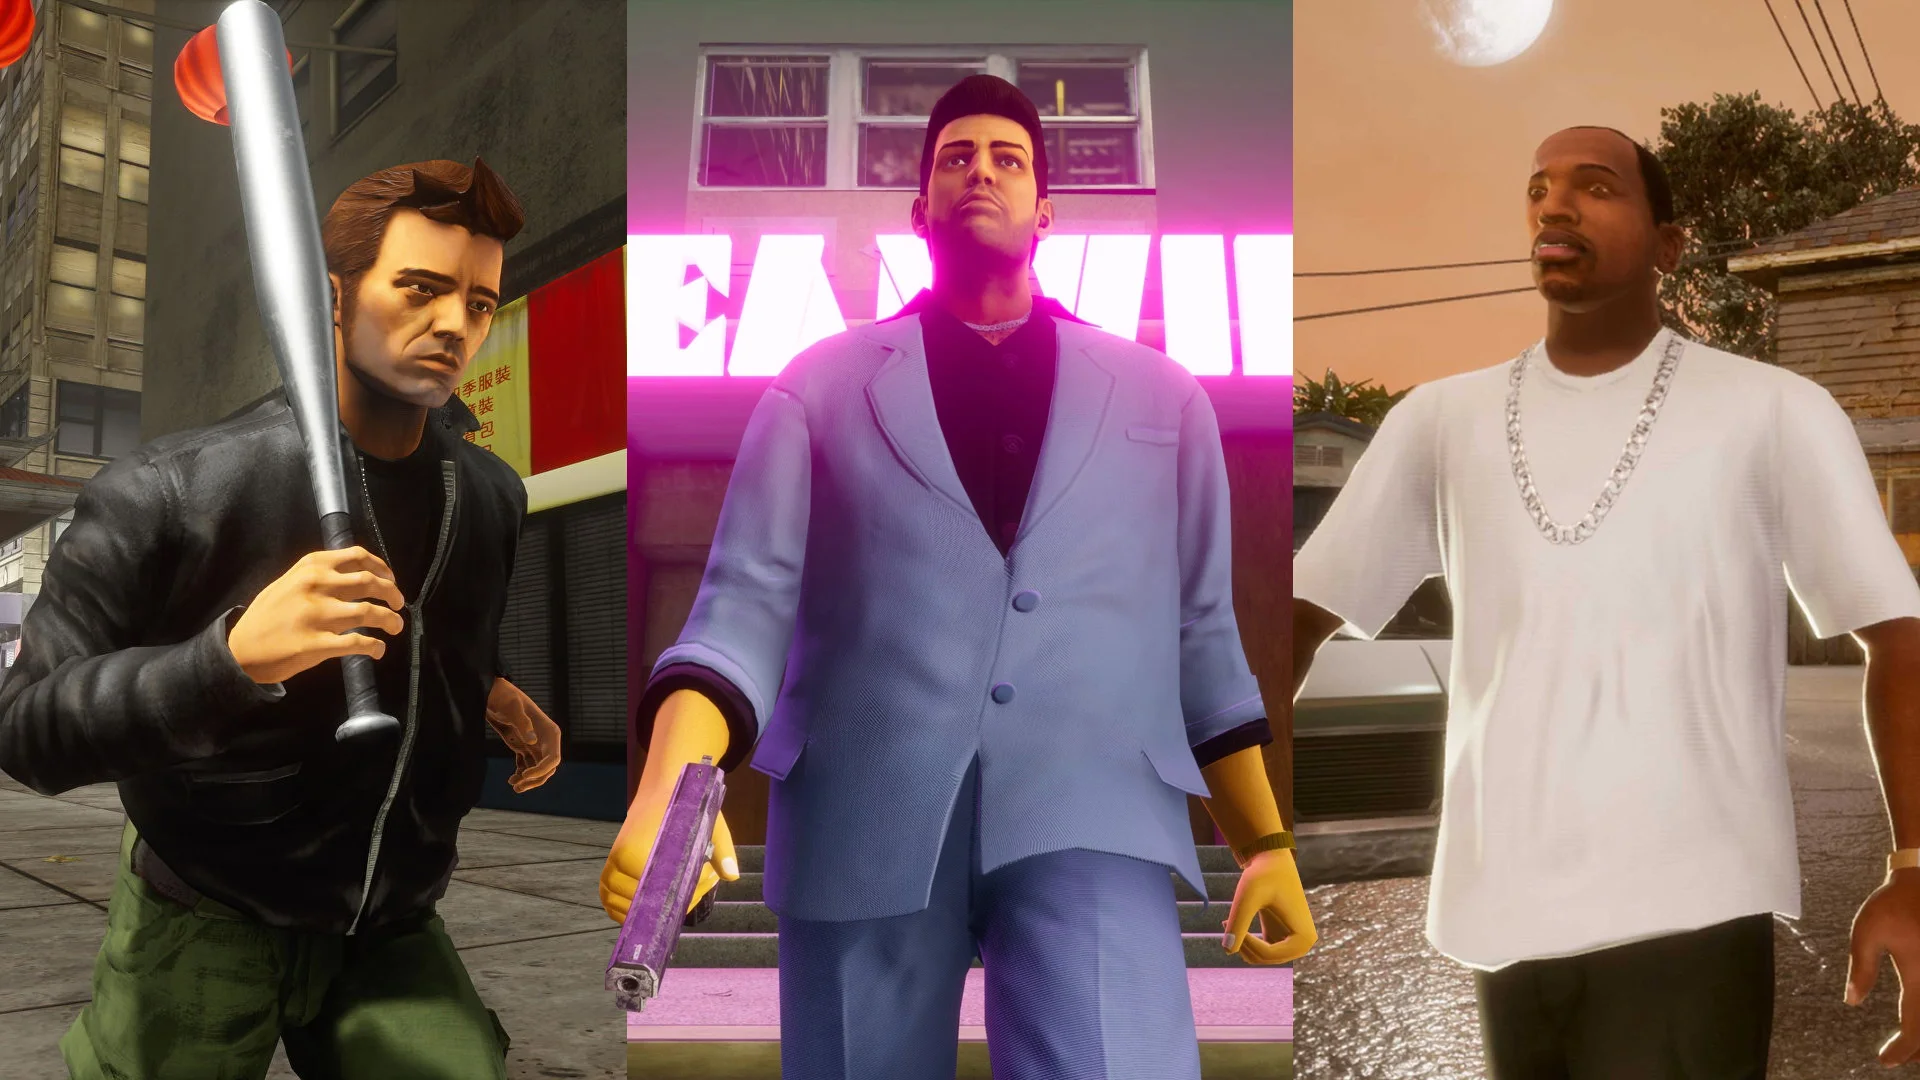 GTA+ subscription holders will receive temporary free access to the remastered version of the classic GTA trilogy